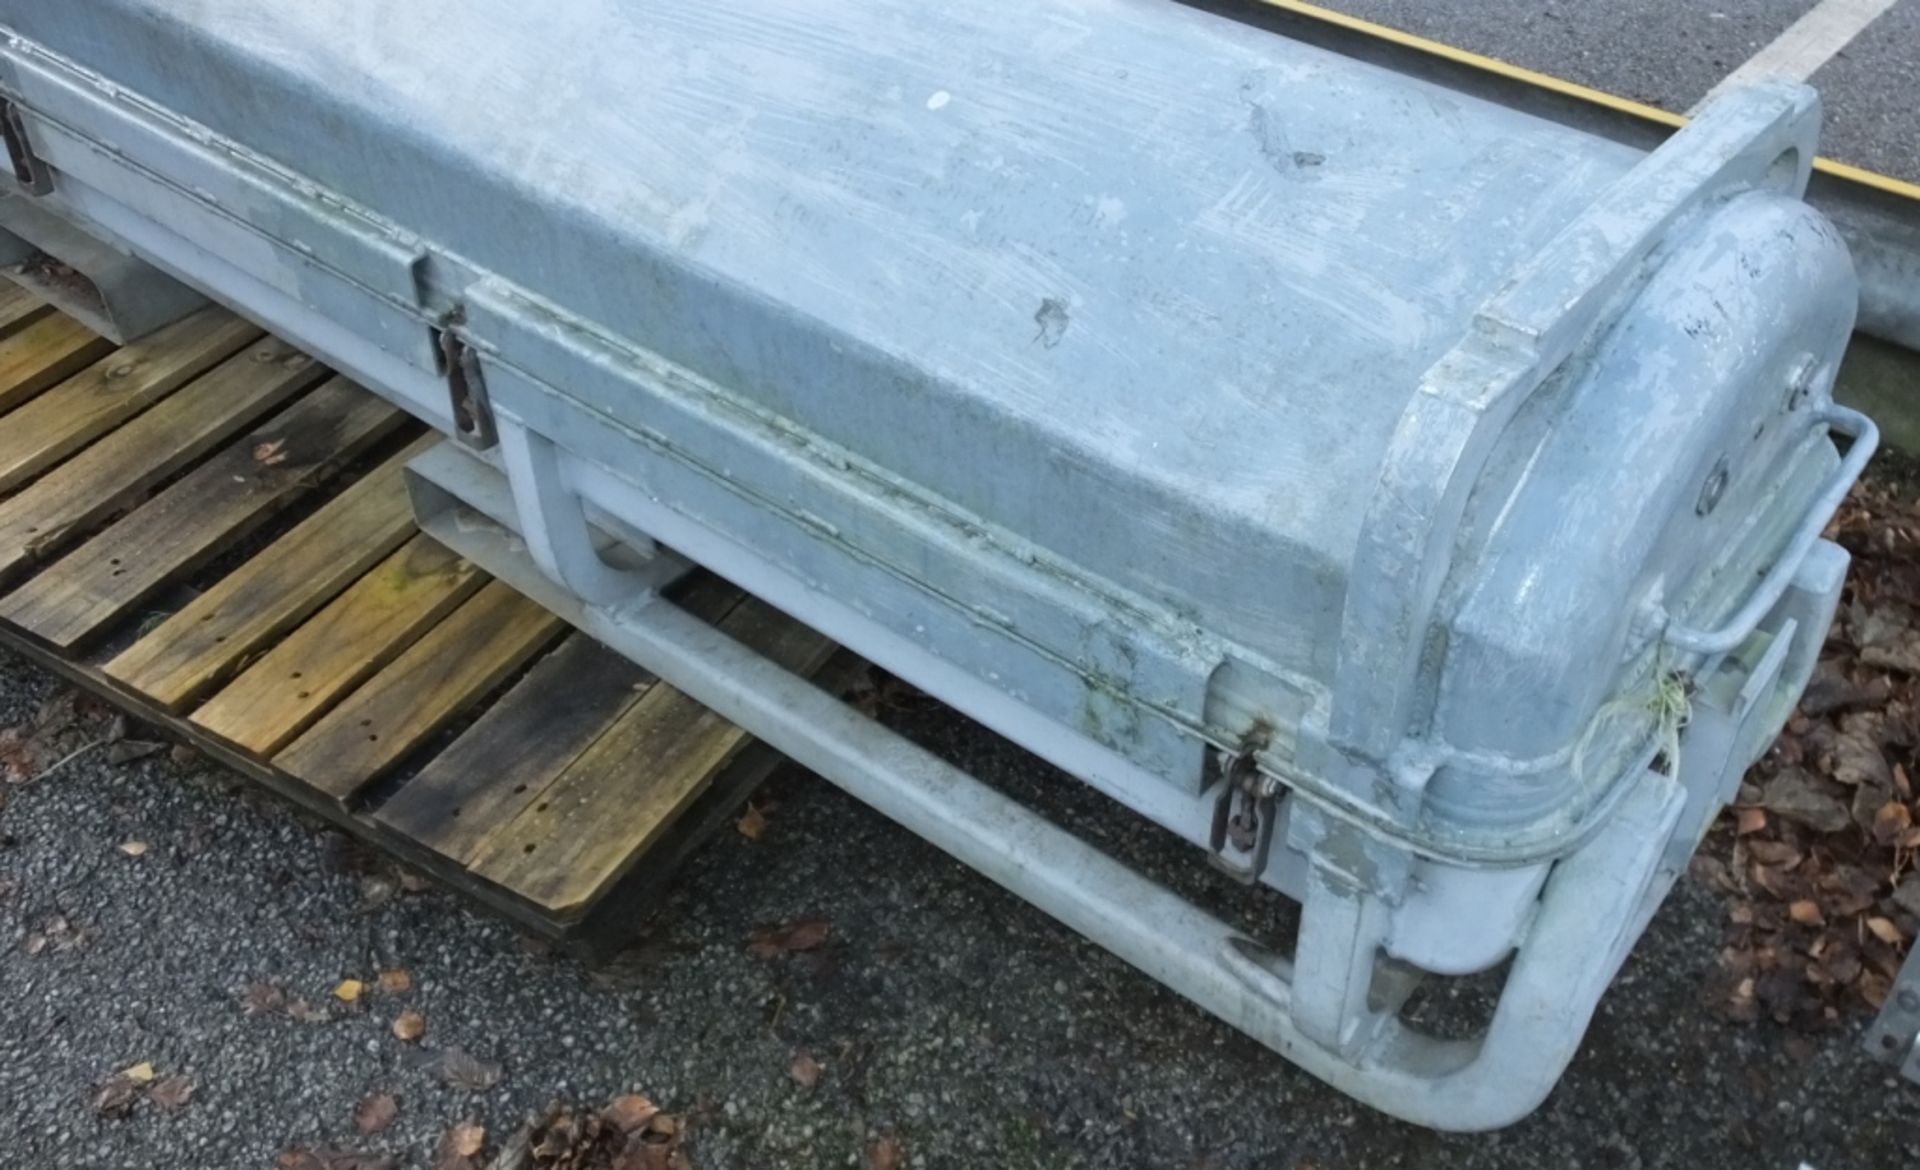 Torpedo Transportation Case with Fuel Tank 3200 x 550 x 650mm. - Image 2 of 2